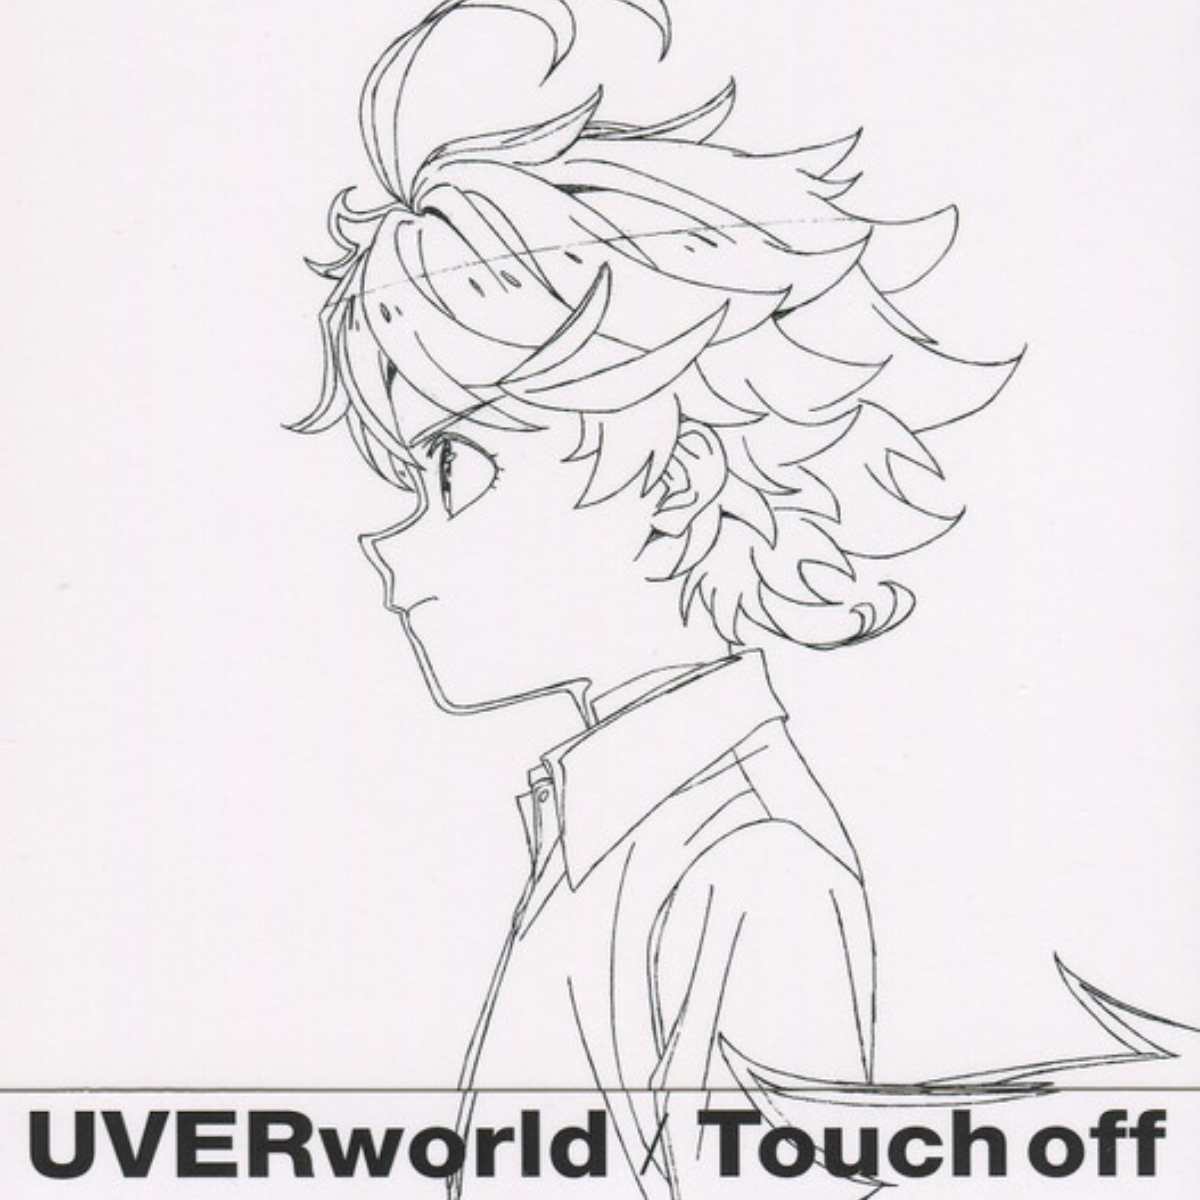 UVERworld - Touch off